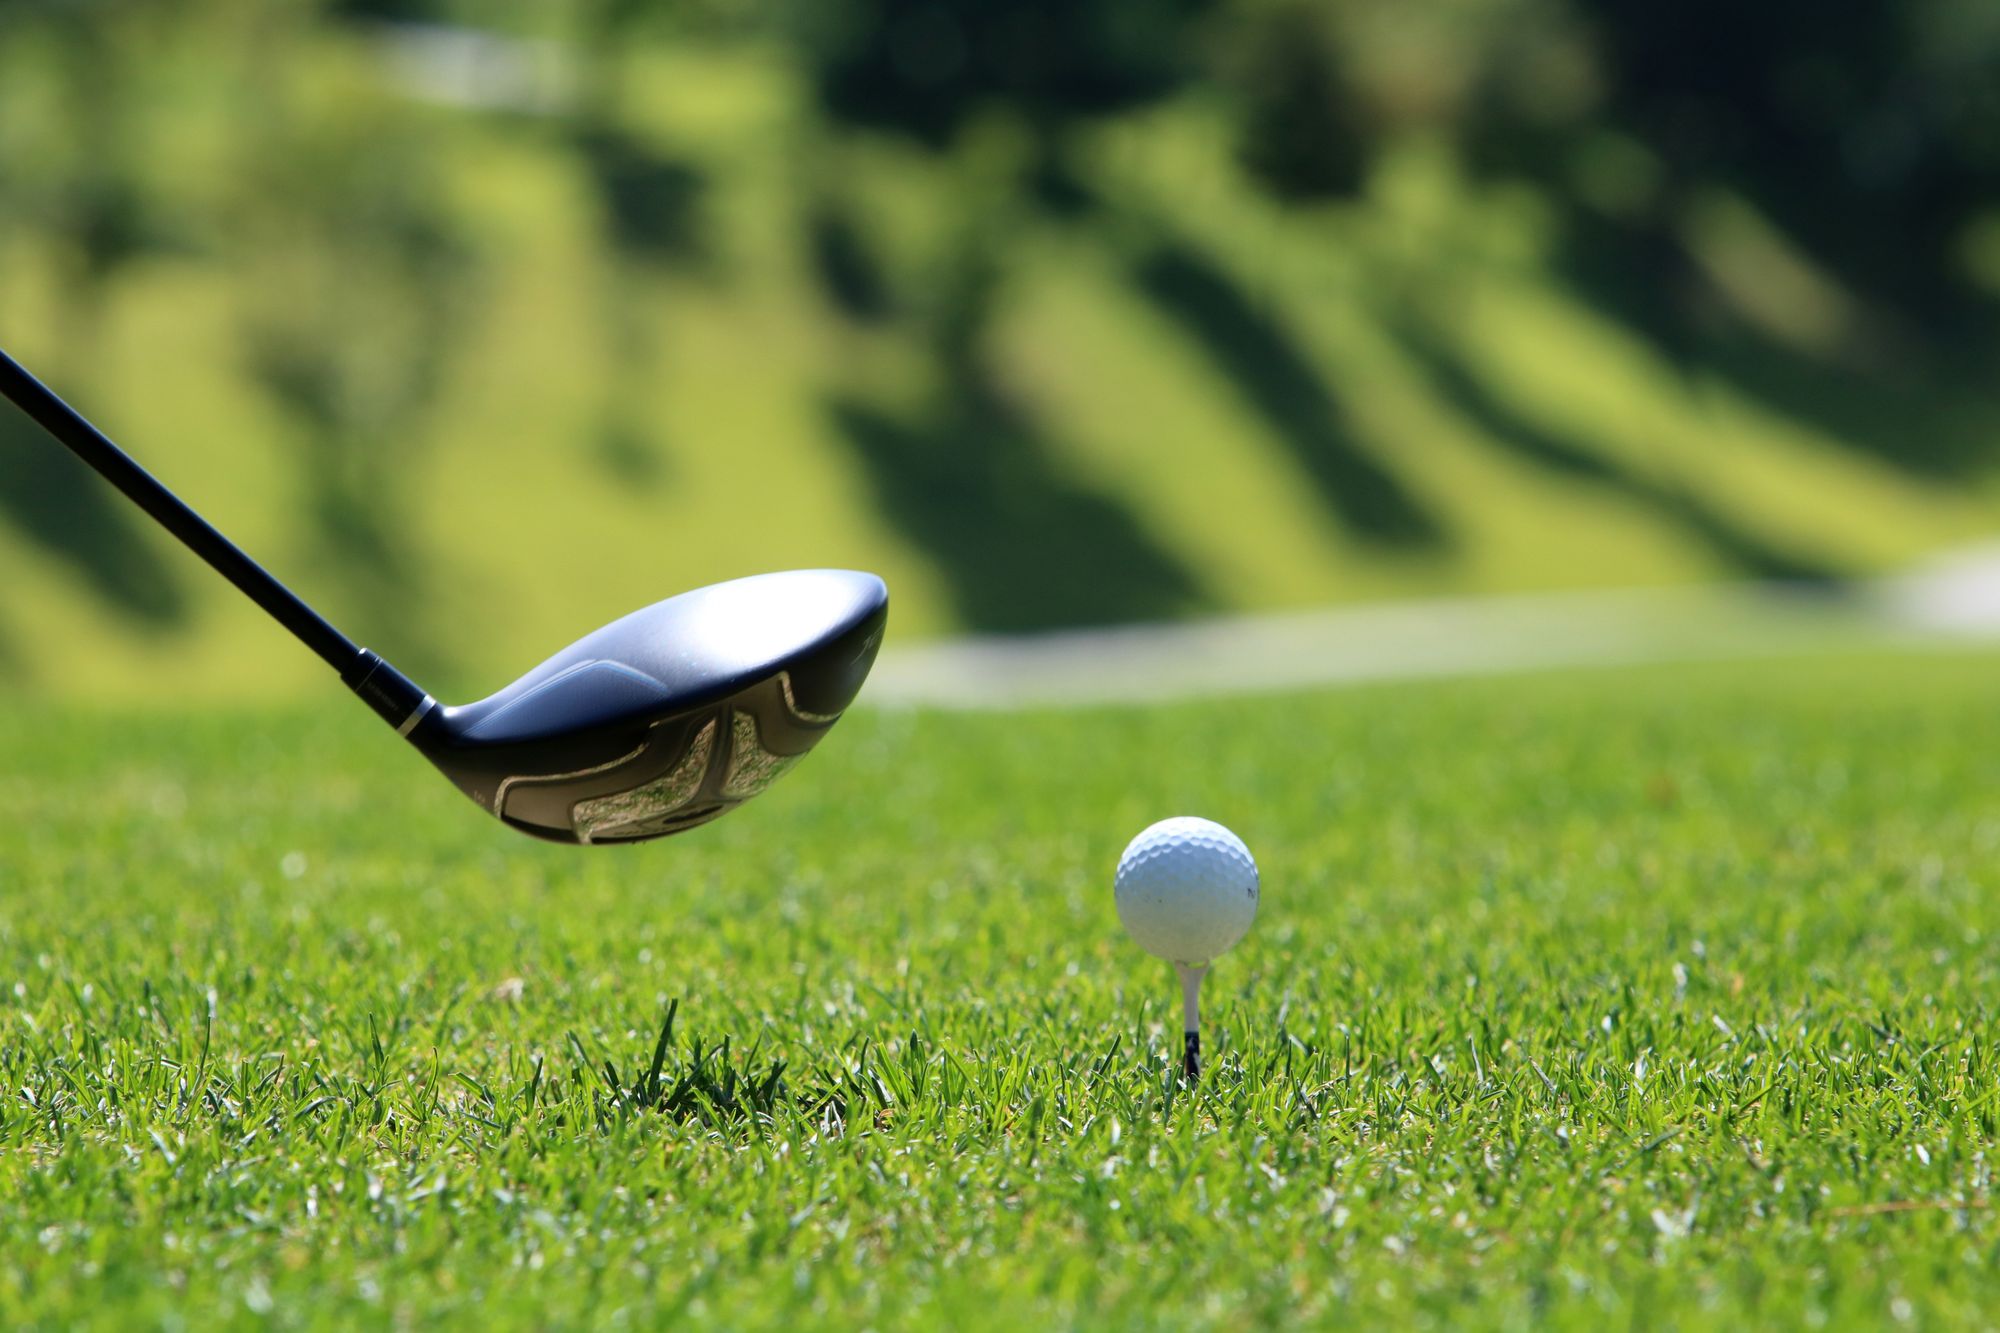 6 Tips to Smash Your Driver Longer & Straighter